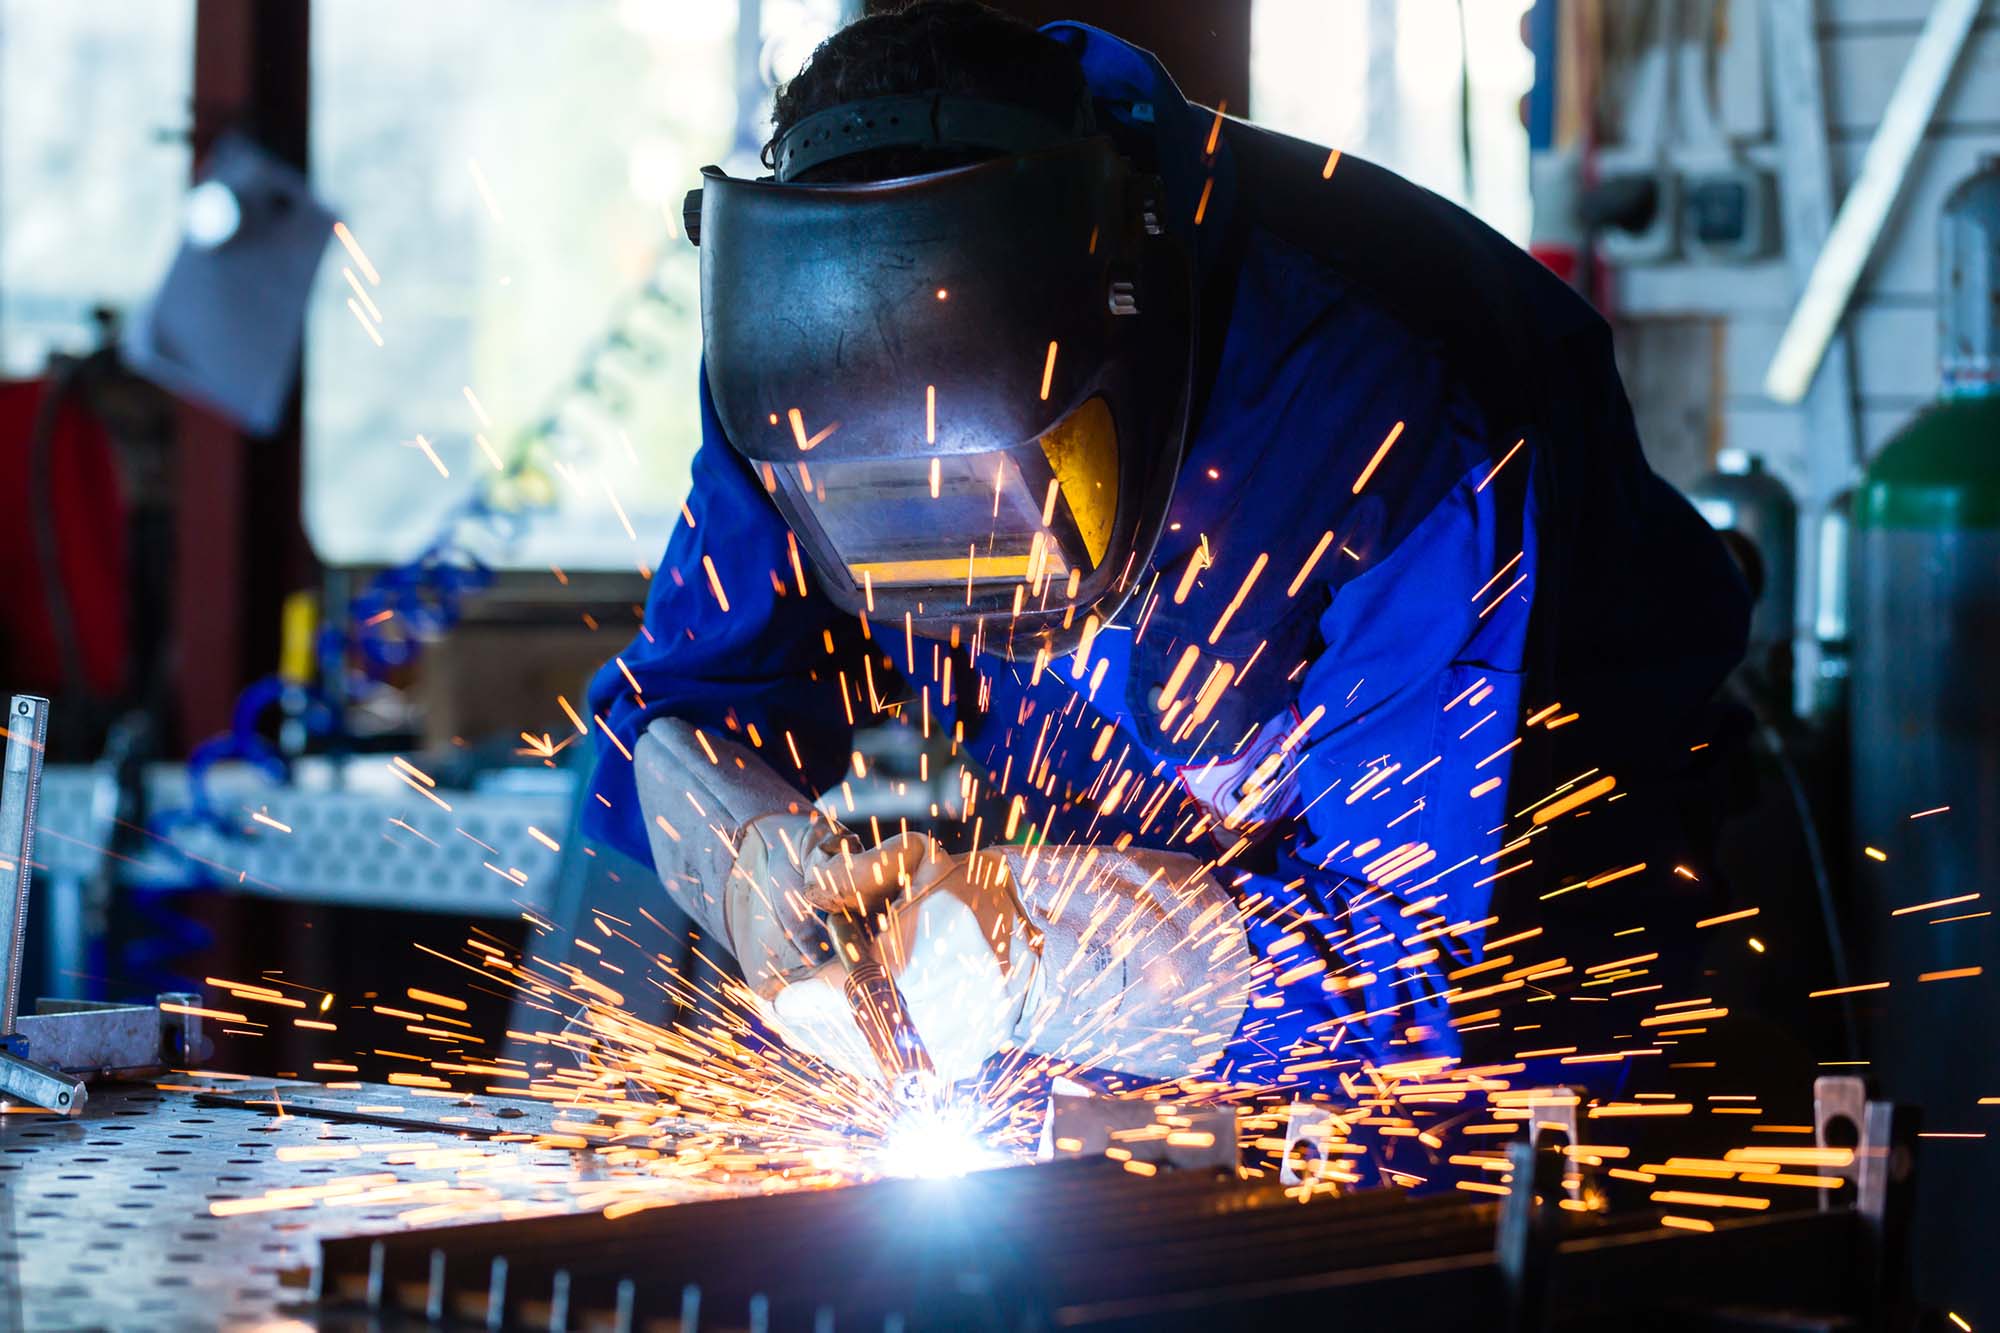 Human working of welding with a lot of sparks in a metal industry factory